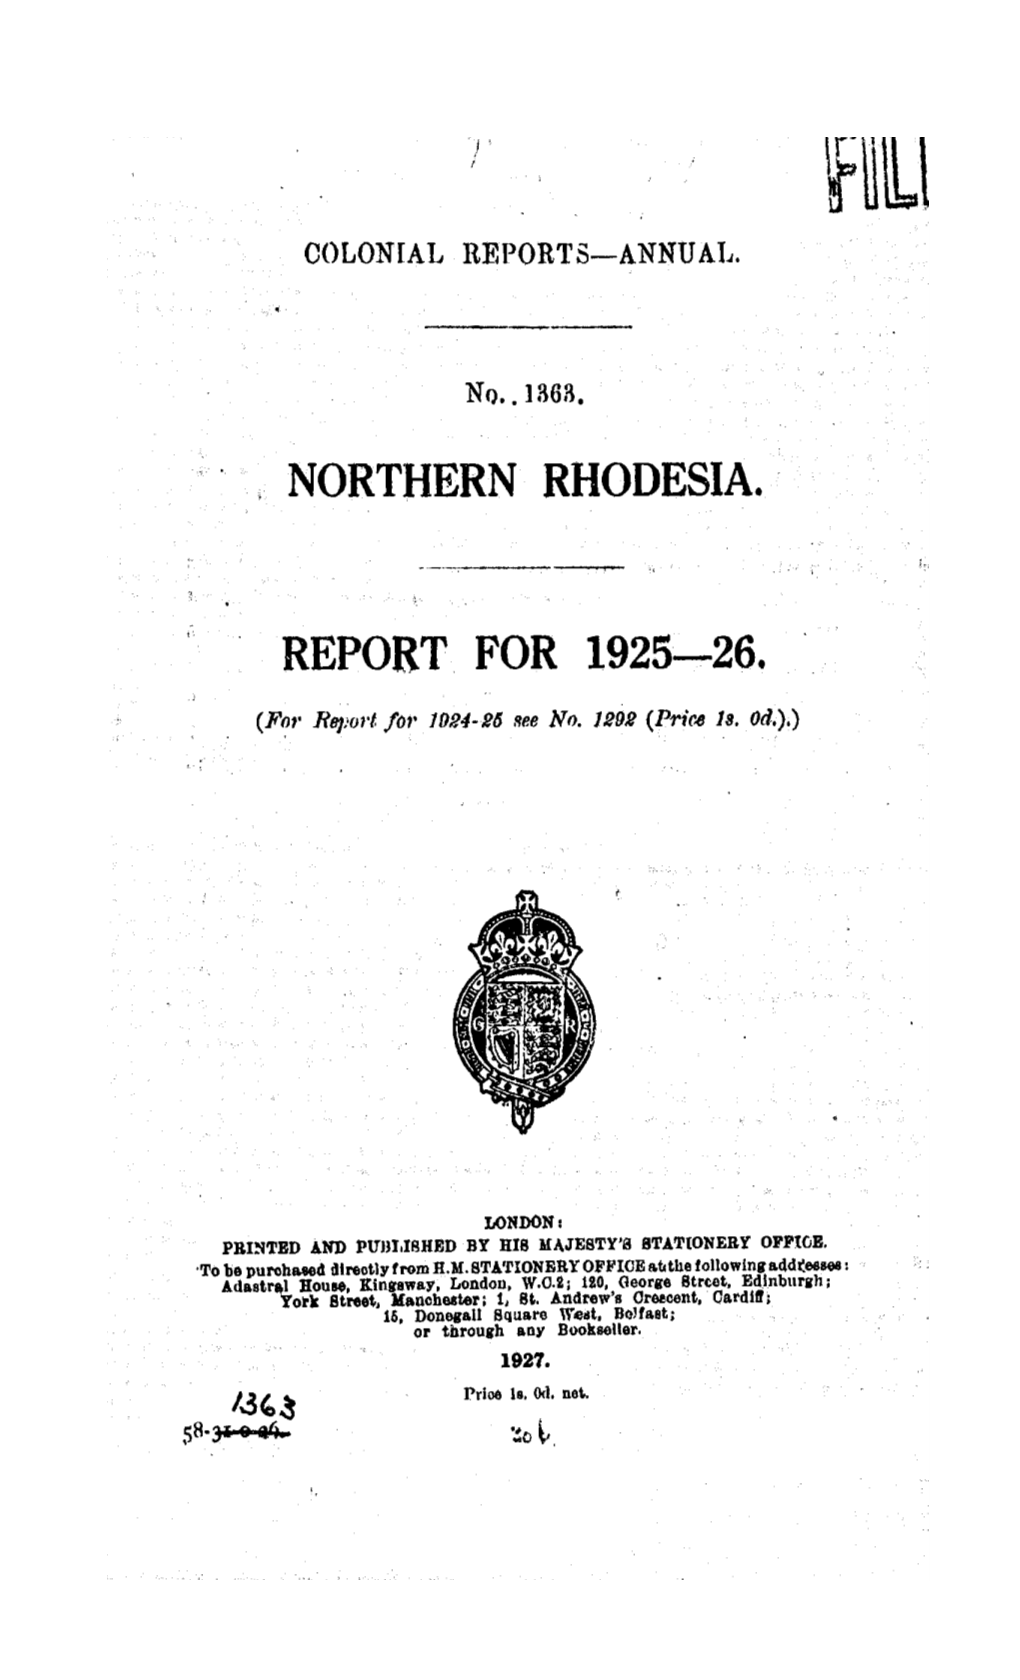 Annual Report of the Colonies, Northern Rhodesia, 1925-26